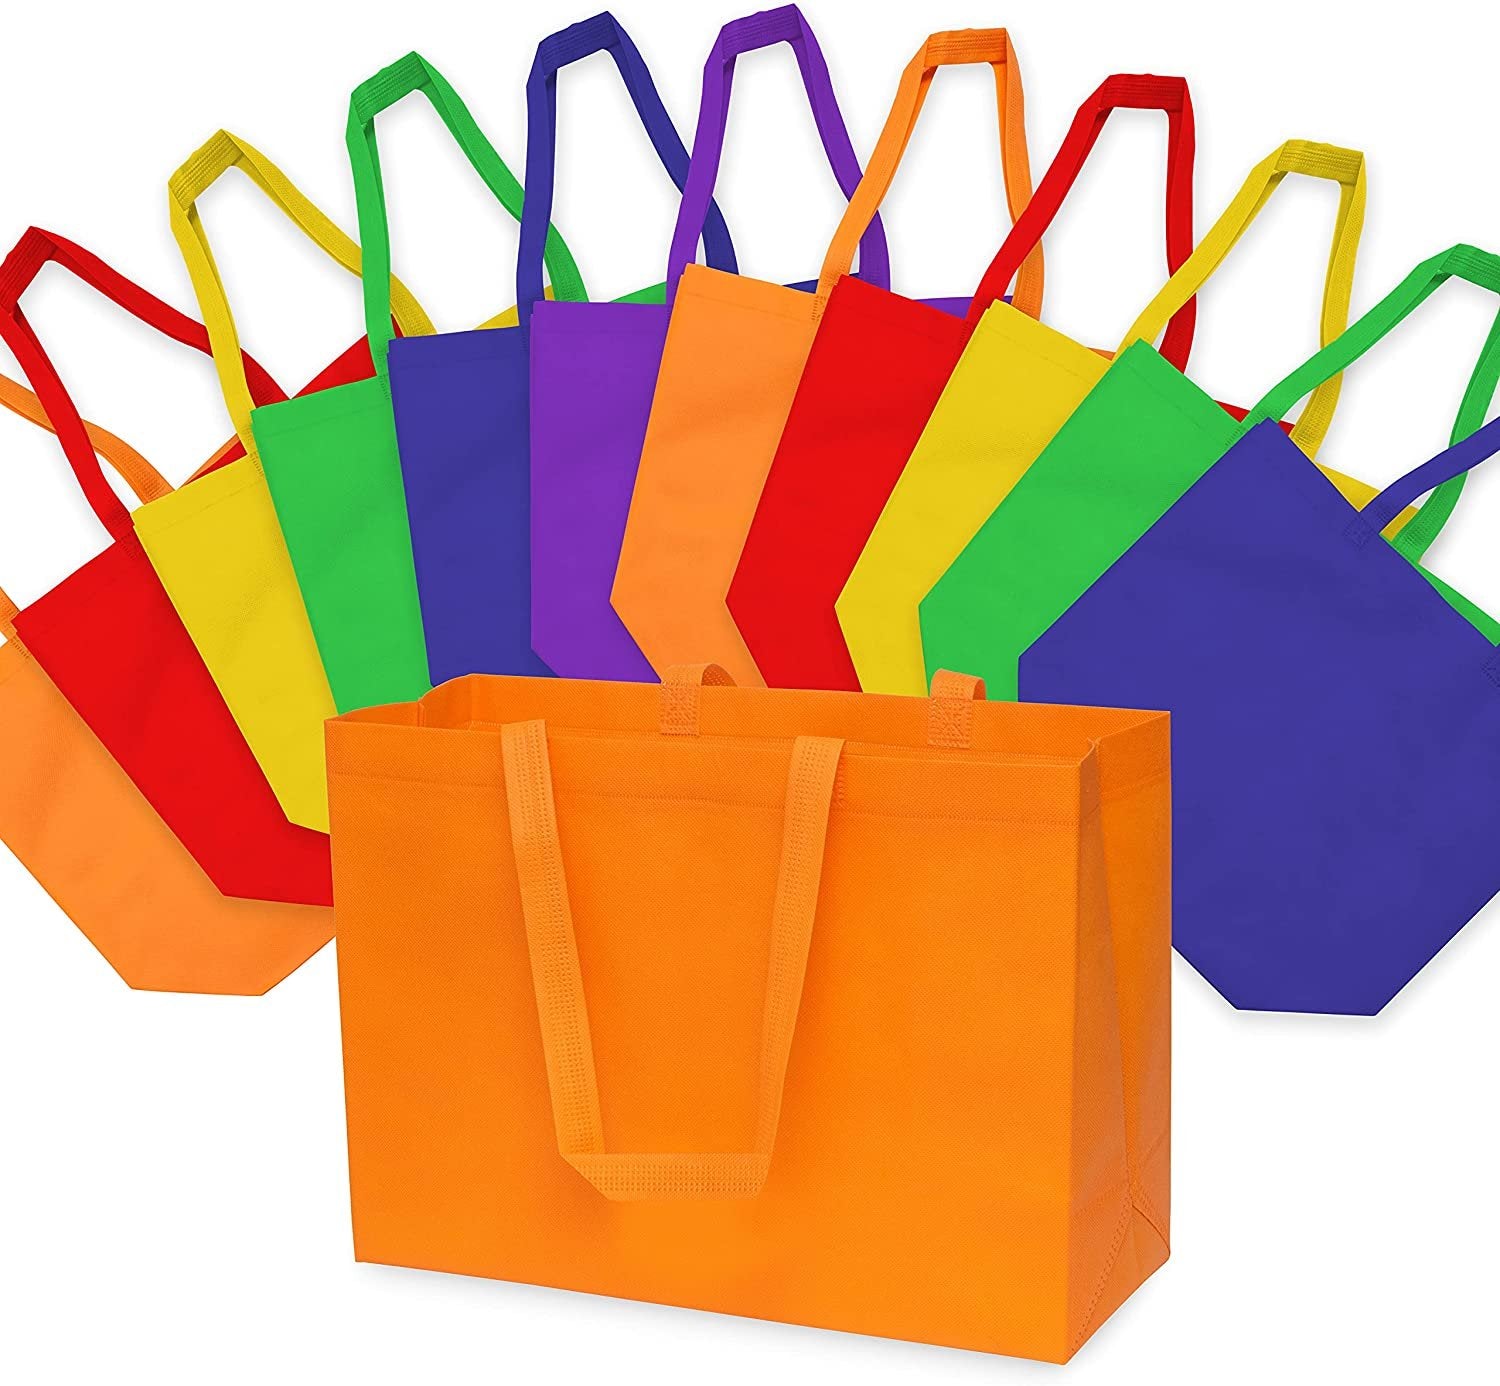 Gift Bags Large - 12 Pack Large Assorted Rainbow Color Reusable Tote Bags with Handles, Cute Fabric Bags for Kids Birthday Gifts & Goodies, Party Favors, Showers, Christmas & Holidays, Bulk - 16x6x12